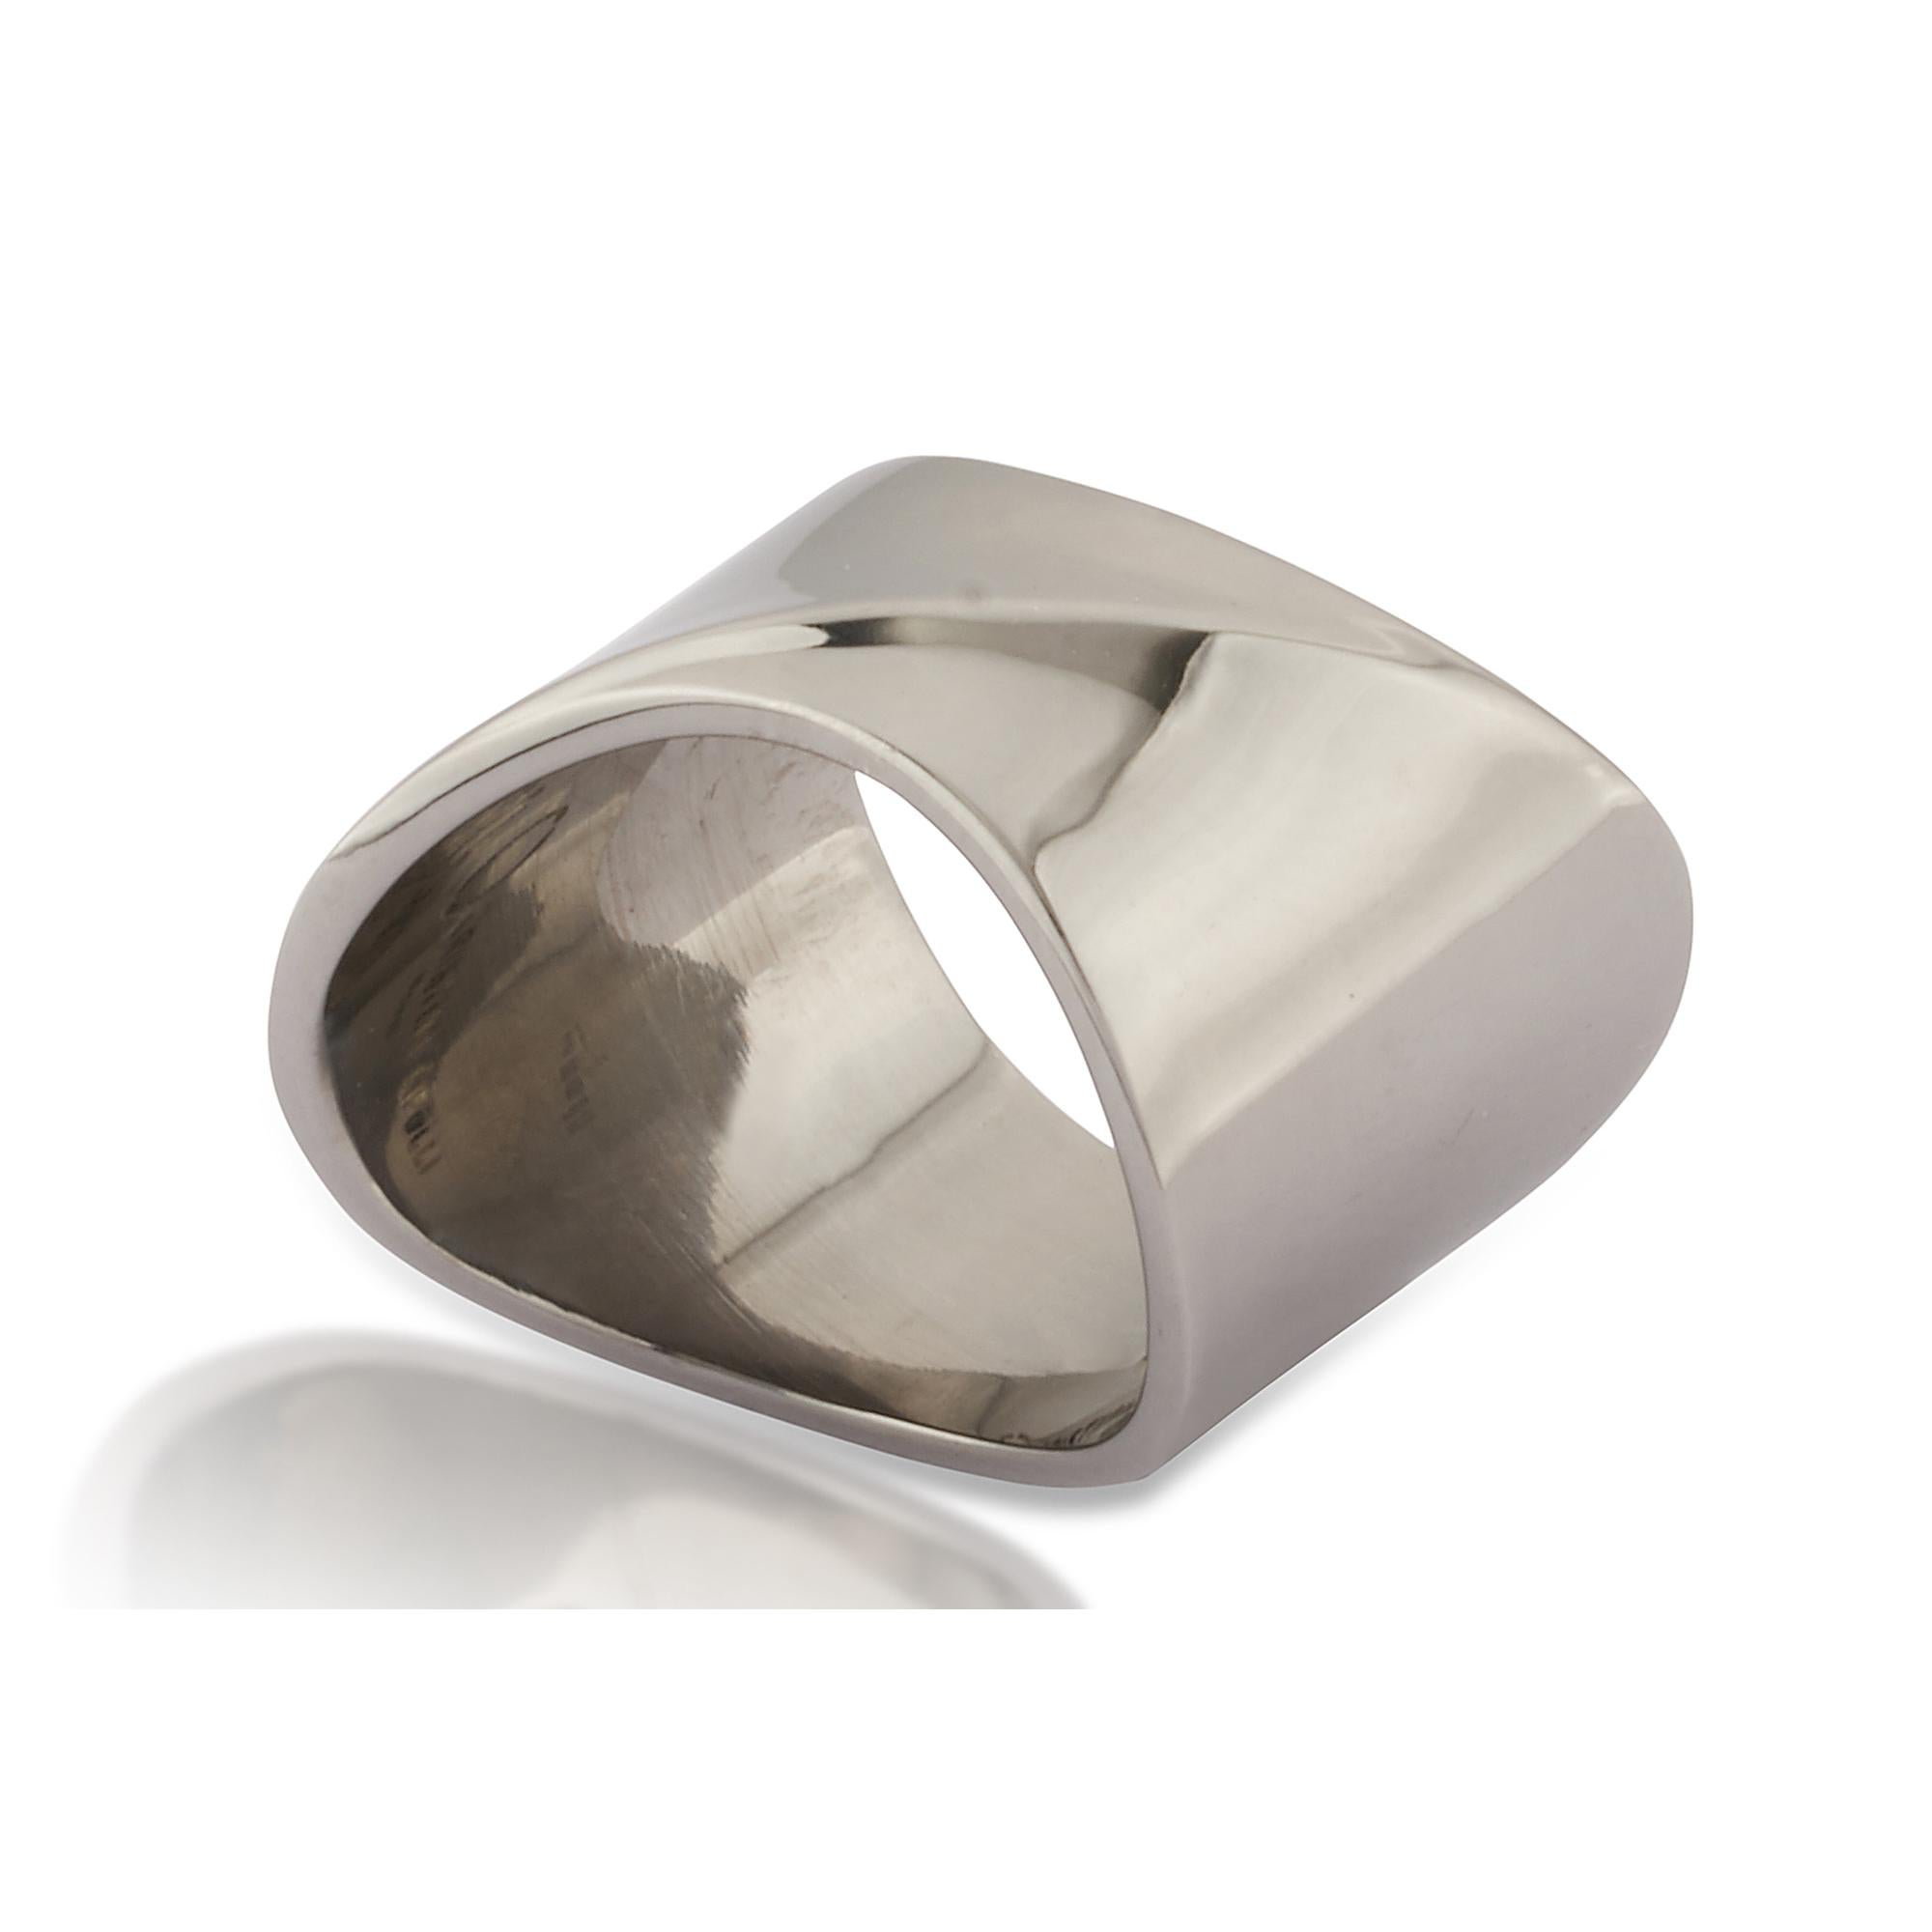 Unisex band ring with a minimalistic and bold design.
Size UK M - US 6 1/2 in stock, more sizes available upon request, made to order items are not returnable.
Perfect worn solo or horizontally stacked with multiple rings from the same